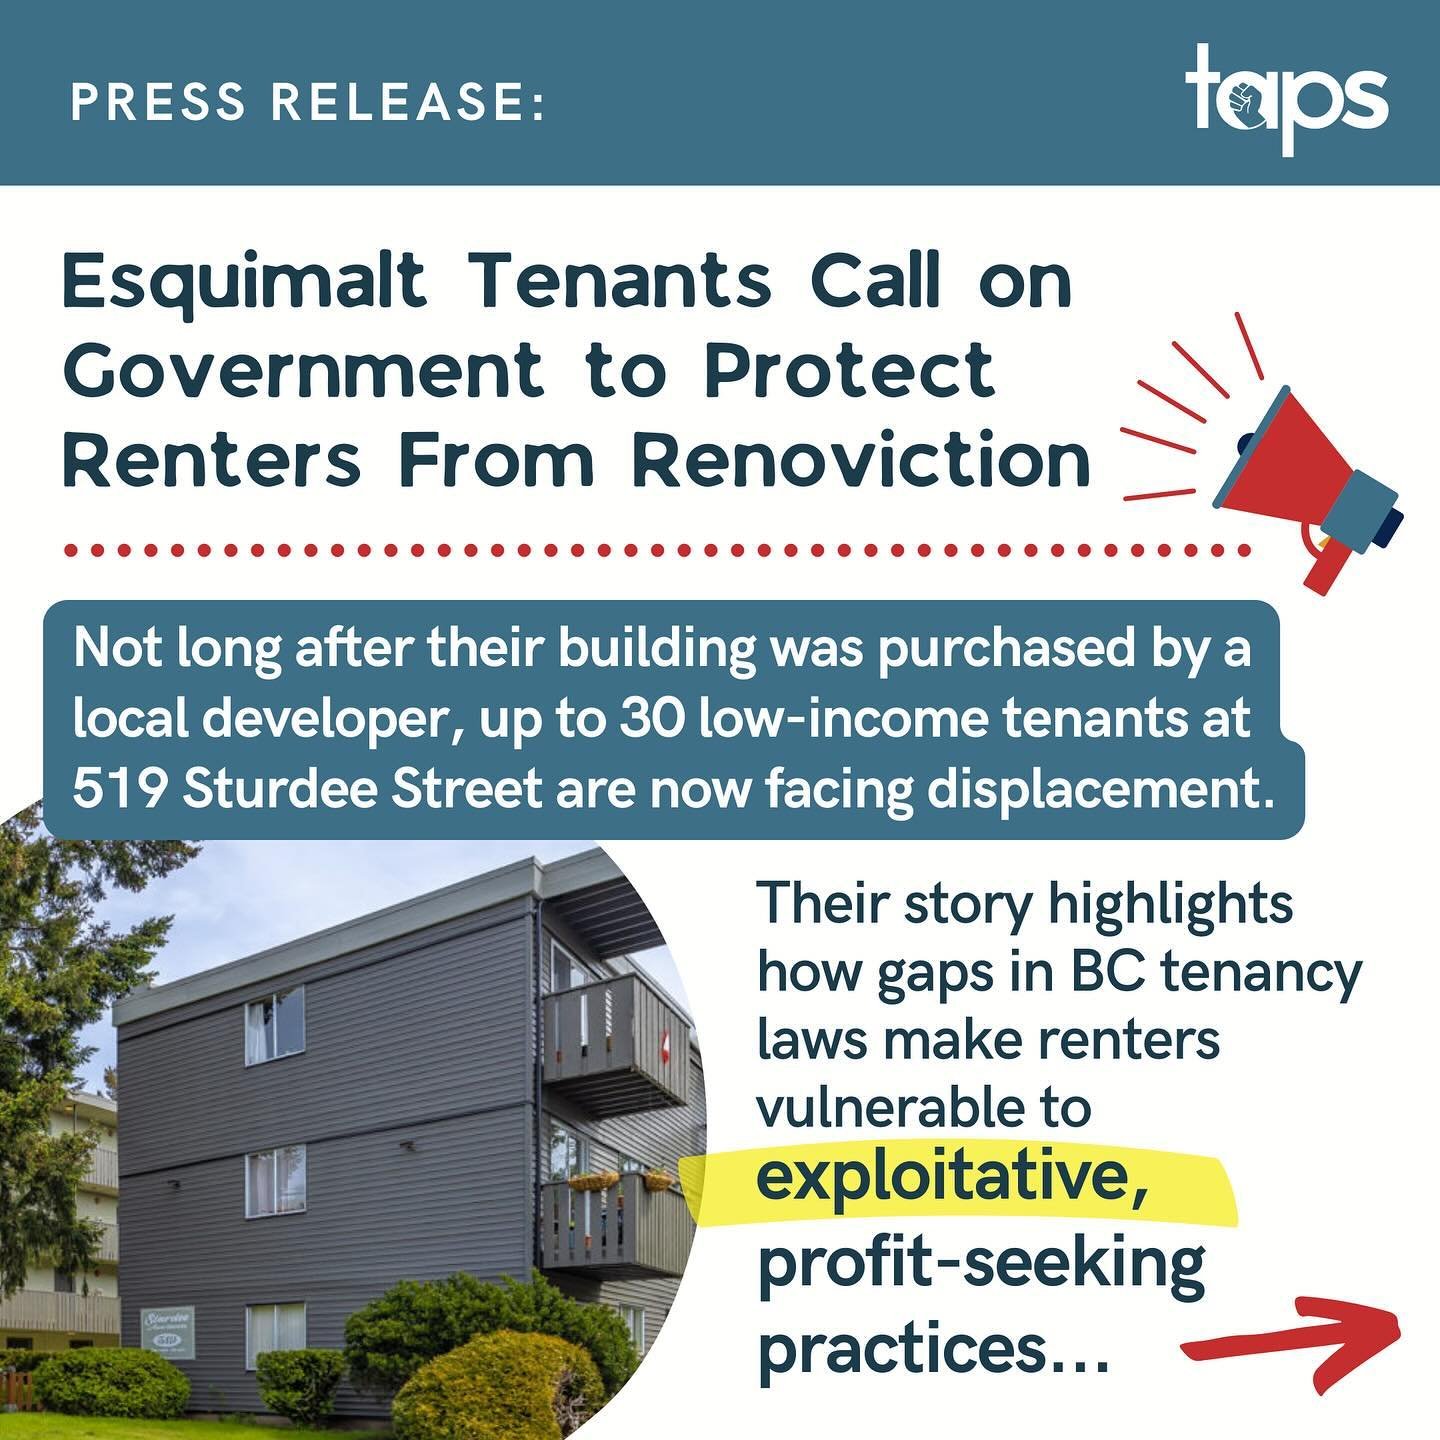 Not even a year after Andrew Rebeyka (a local developer with a history of evicting tenants in order to renovate and re-rent at higher rates) purchased 519 Sturdee Street in Esquimalt, up to 30 tenants are now facing displacement. Their story is just 